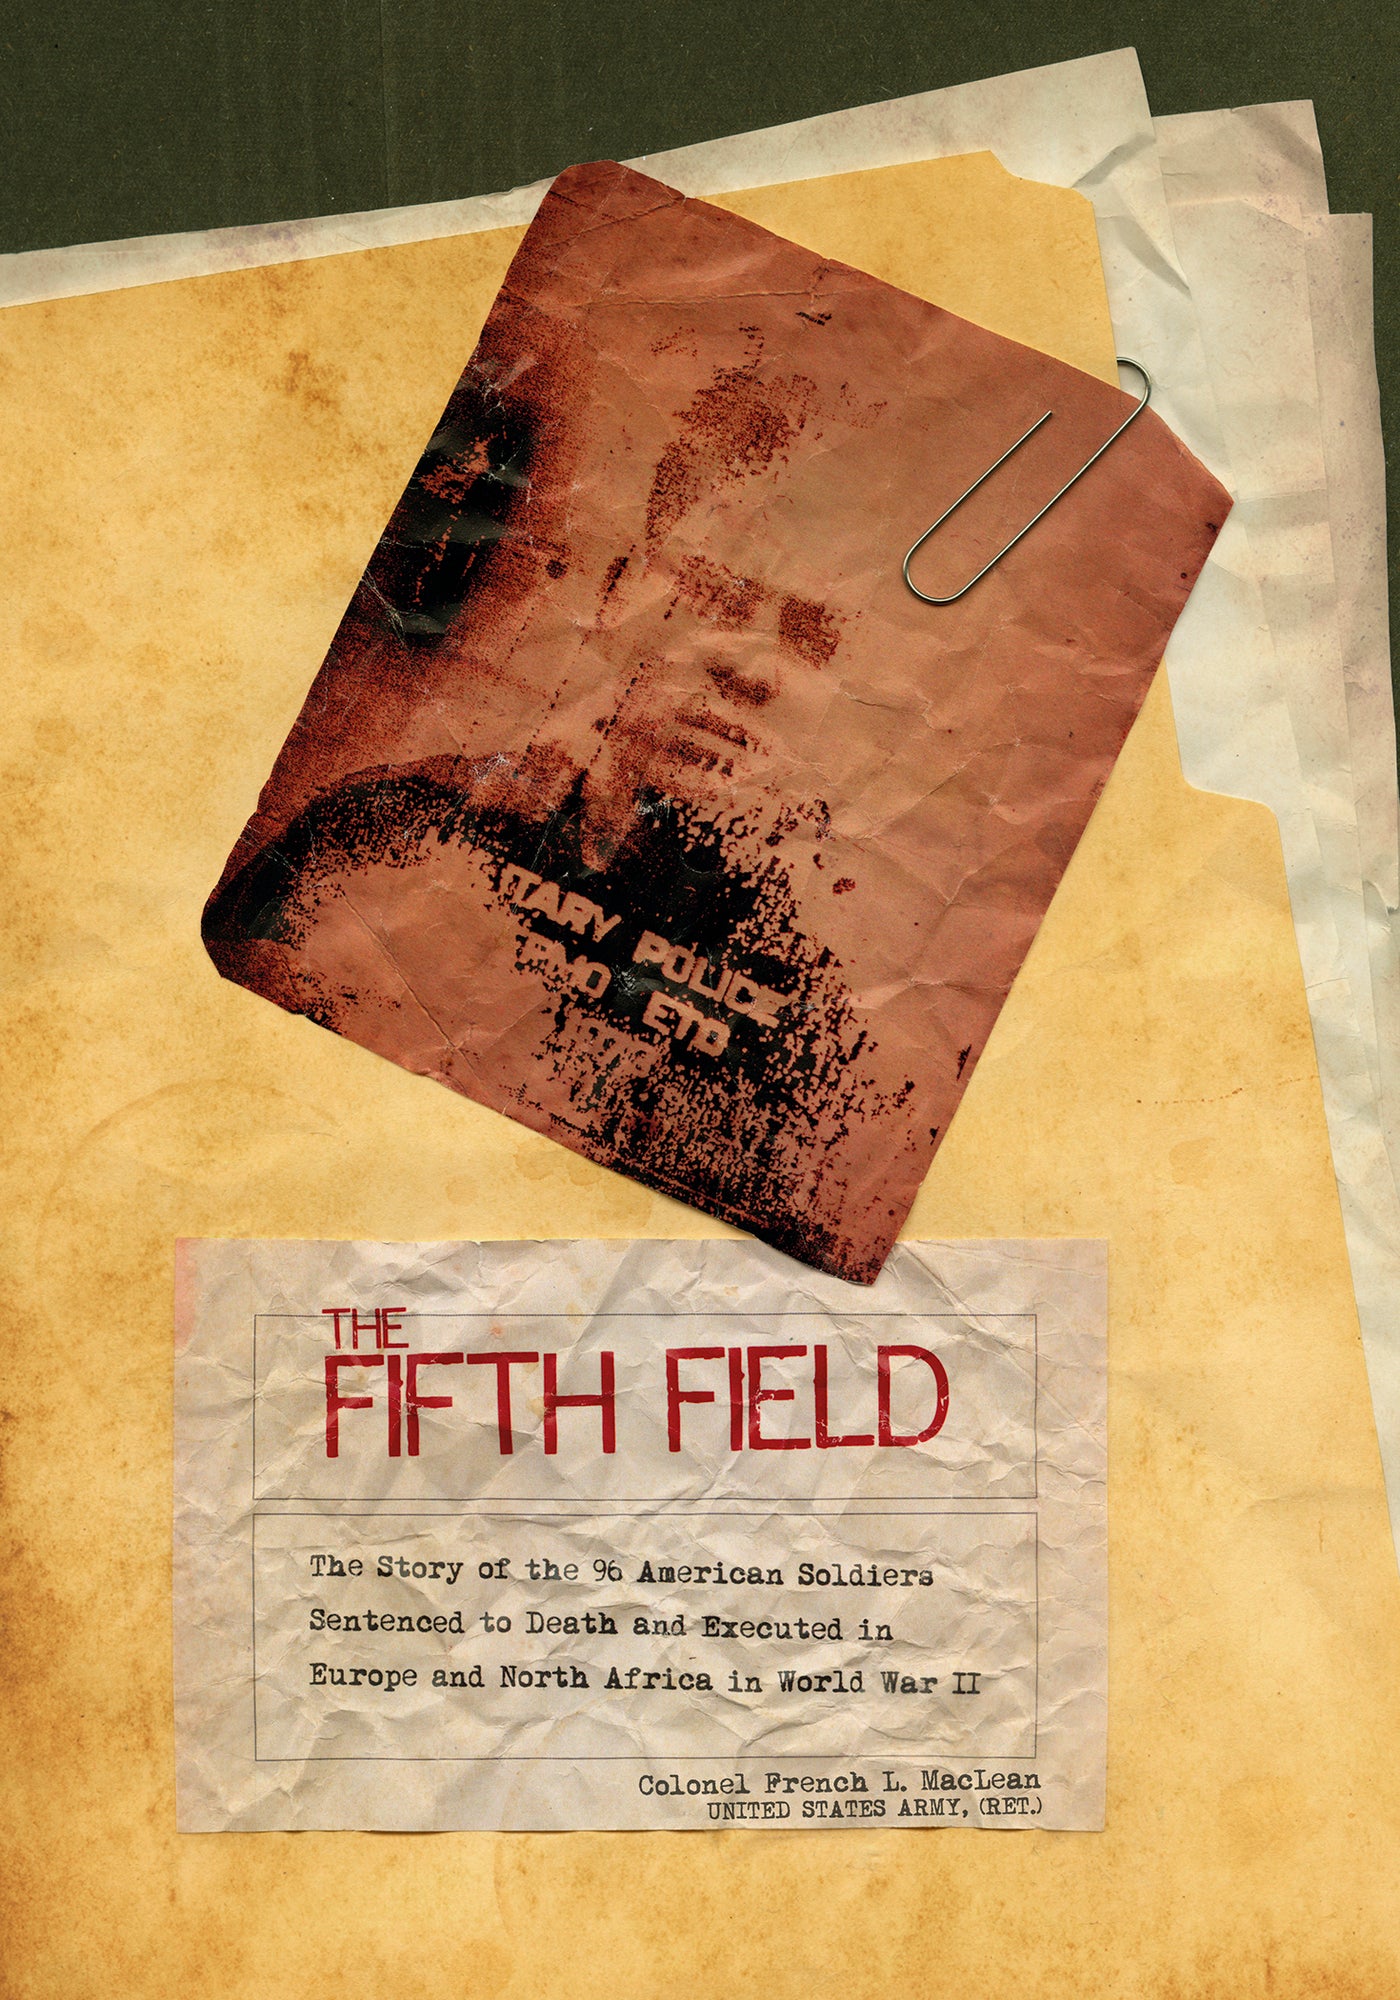 The Fifth Field